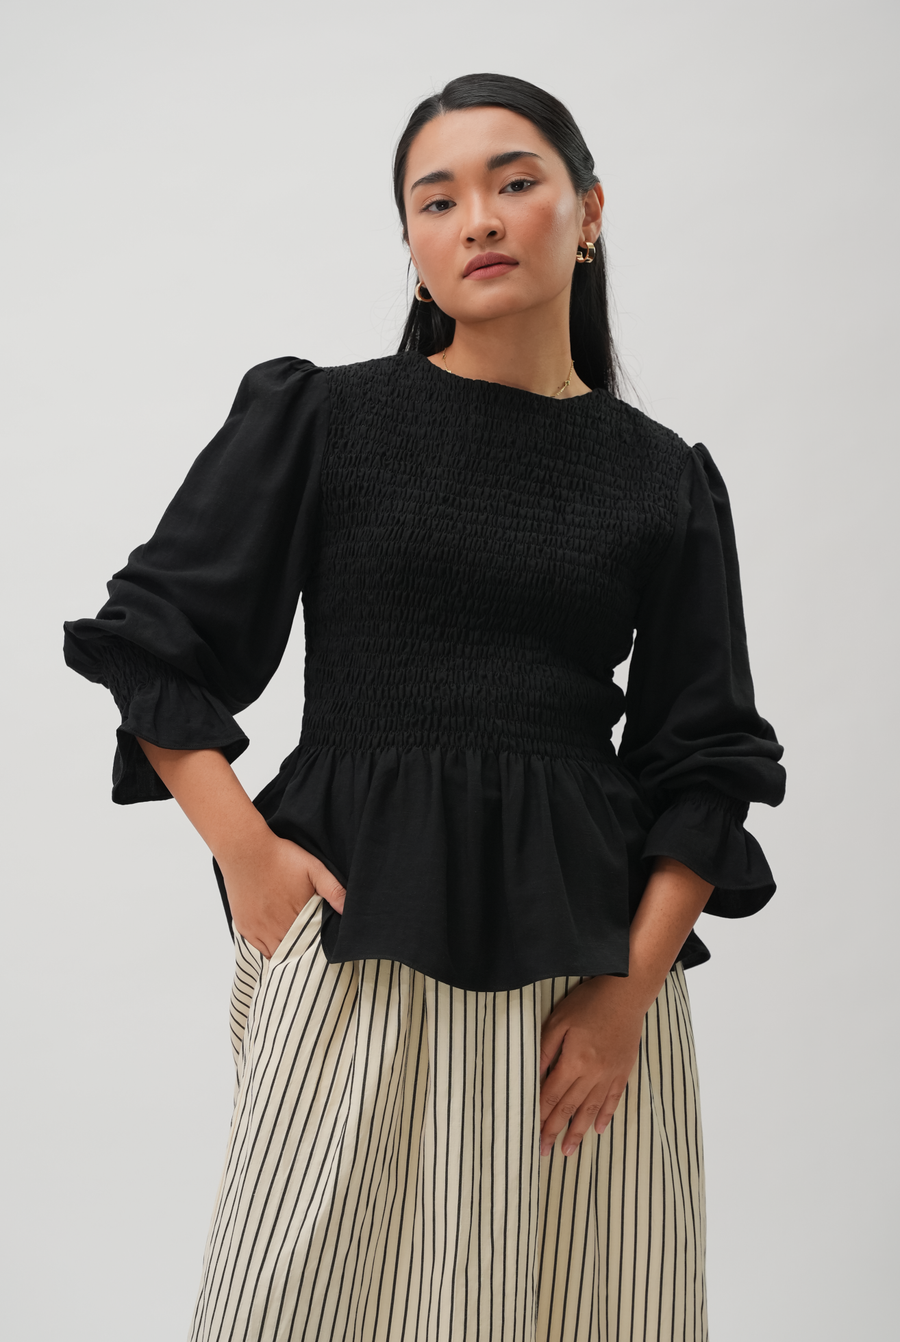 Glow Up Blouse in Black